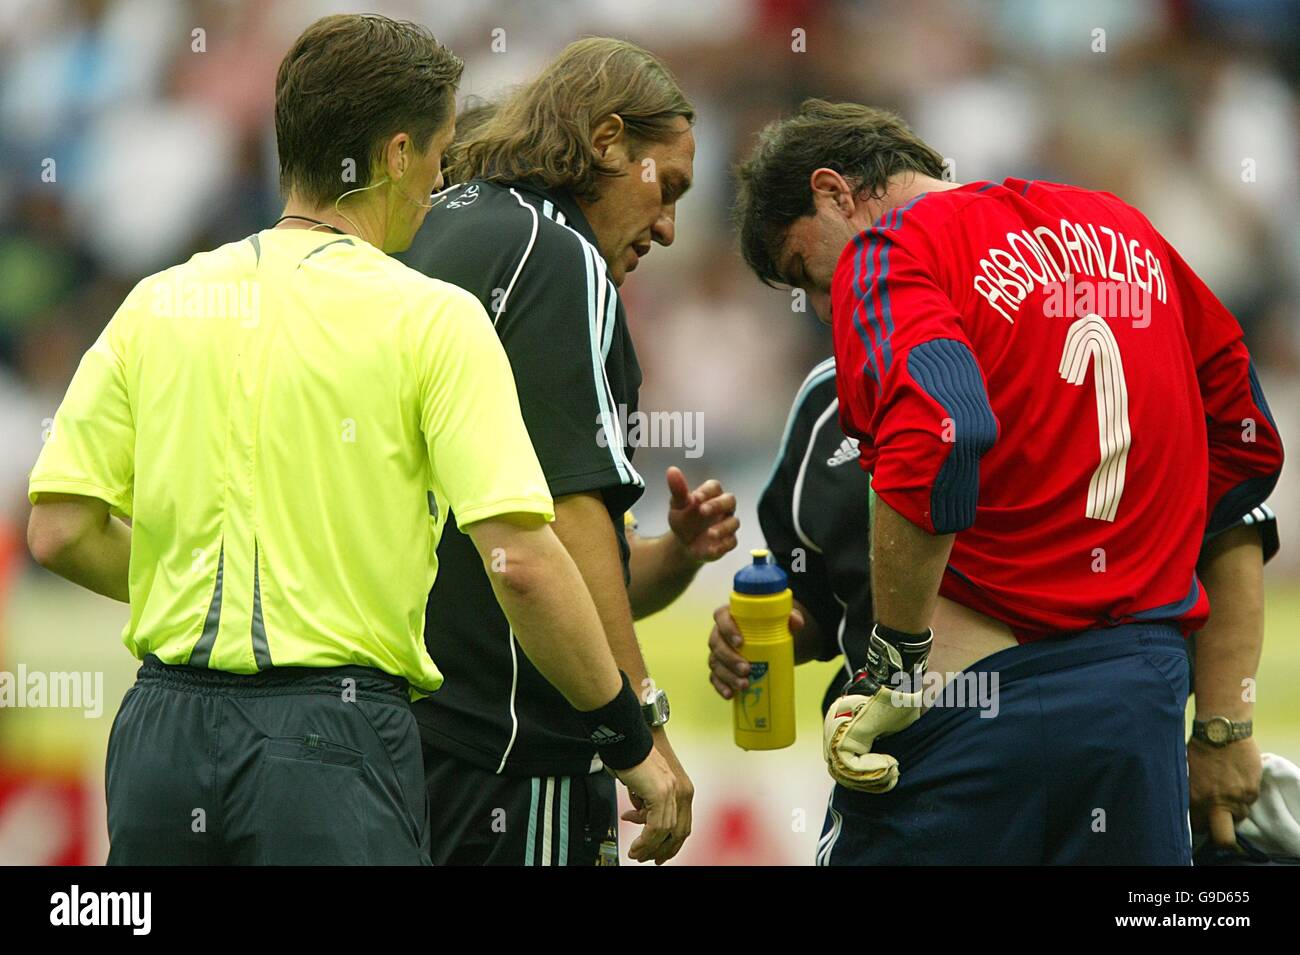 Soccer - 2006 FIFA World Cup Germany - Quarter Final - Germany v Argentina - Olympiastadion. Argentina goalkeeper Roberto Abbondanzieri shows his injury to the medic prior to be substituted Stock Photo